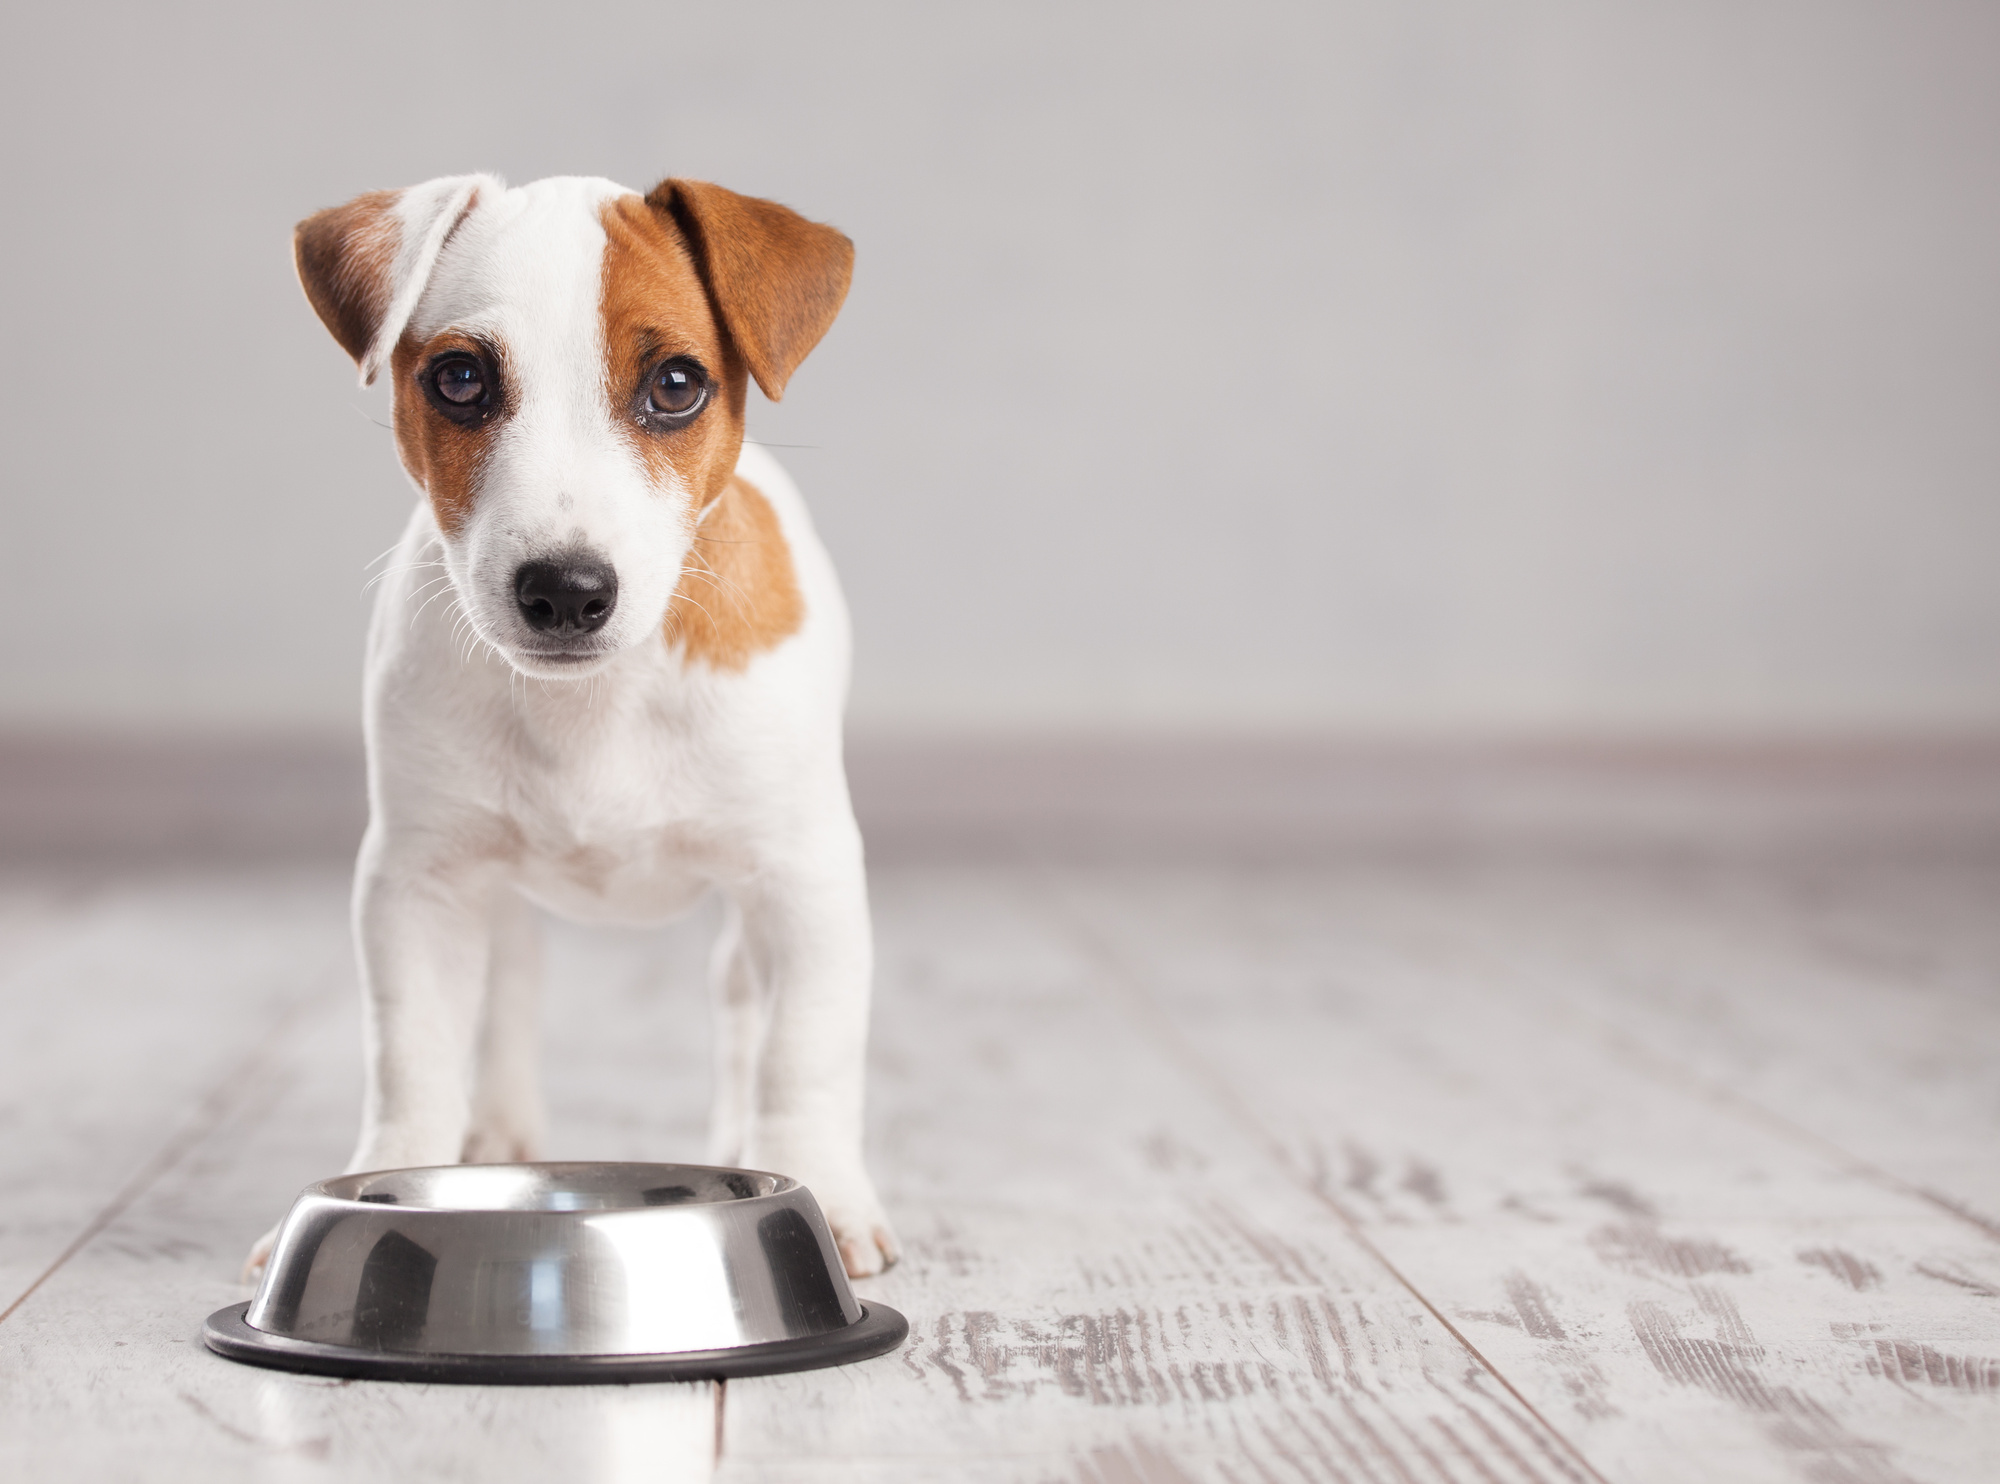 Puppies need special diets and care than their older adult counterparts. Learn what to feed a puppy when you bring it home here.